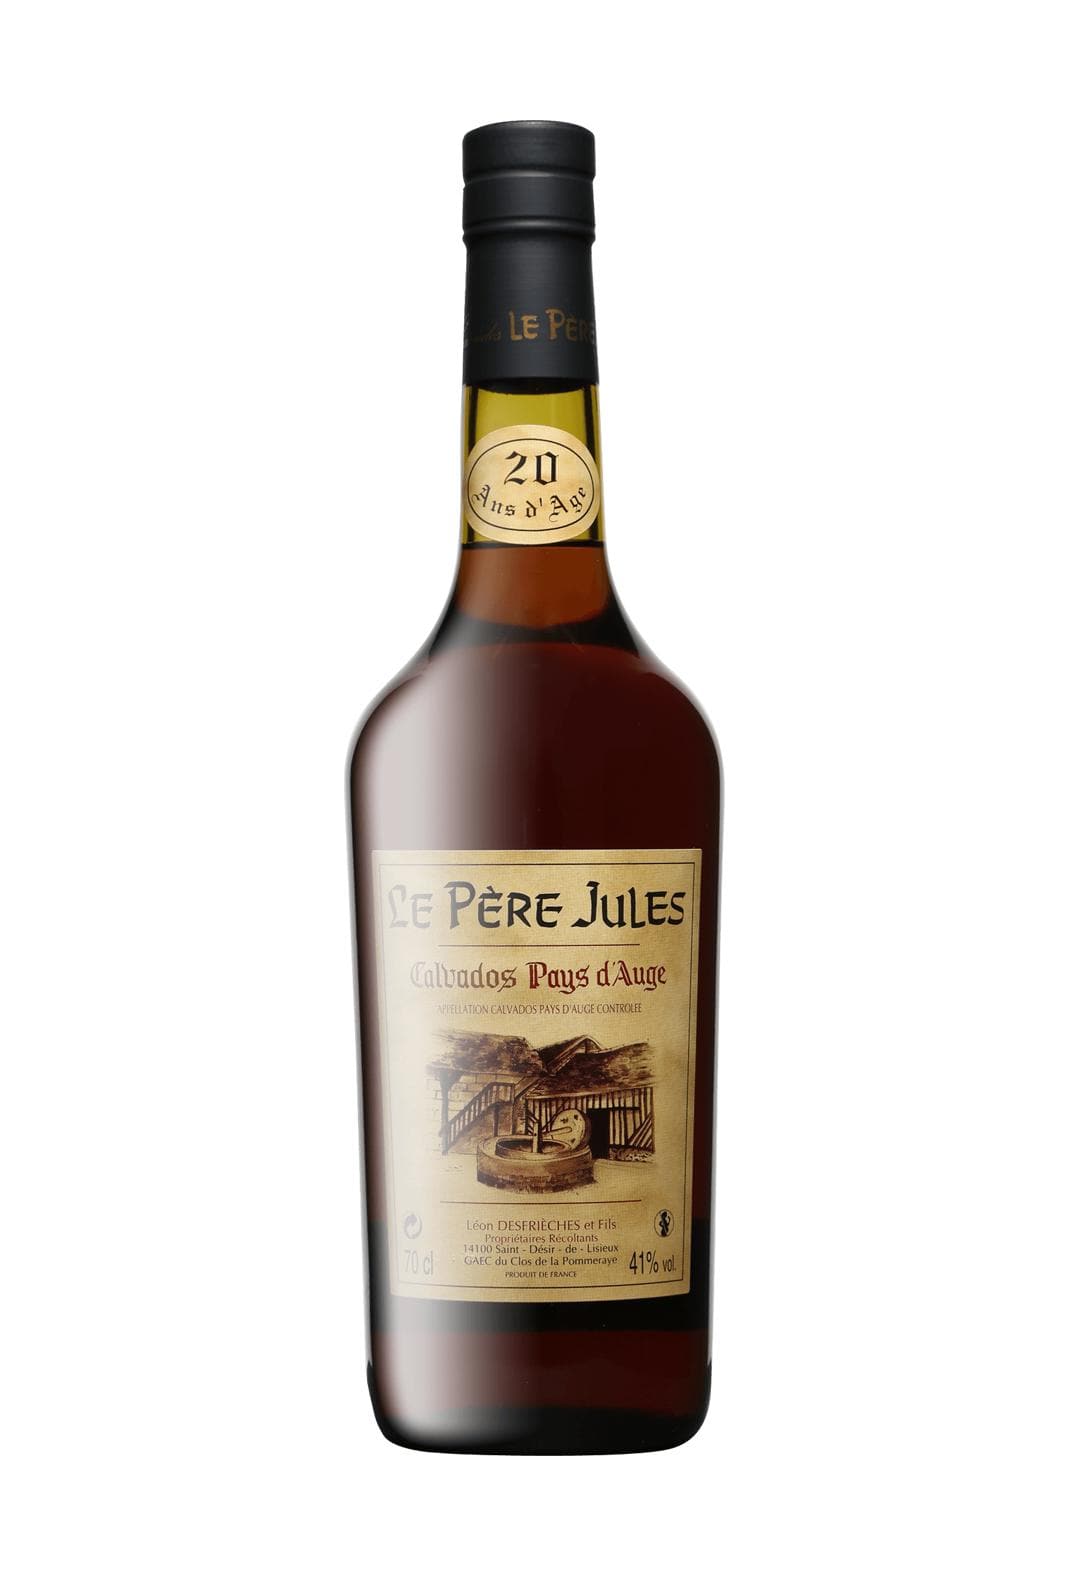 Pere Jules Calvados Pays d'Auge 20 years+ 41% 700ml | Brandy | Shop online at Spirits of France